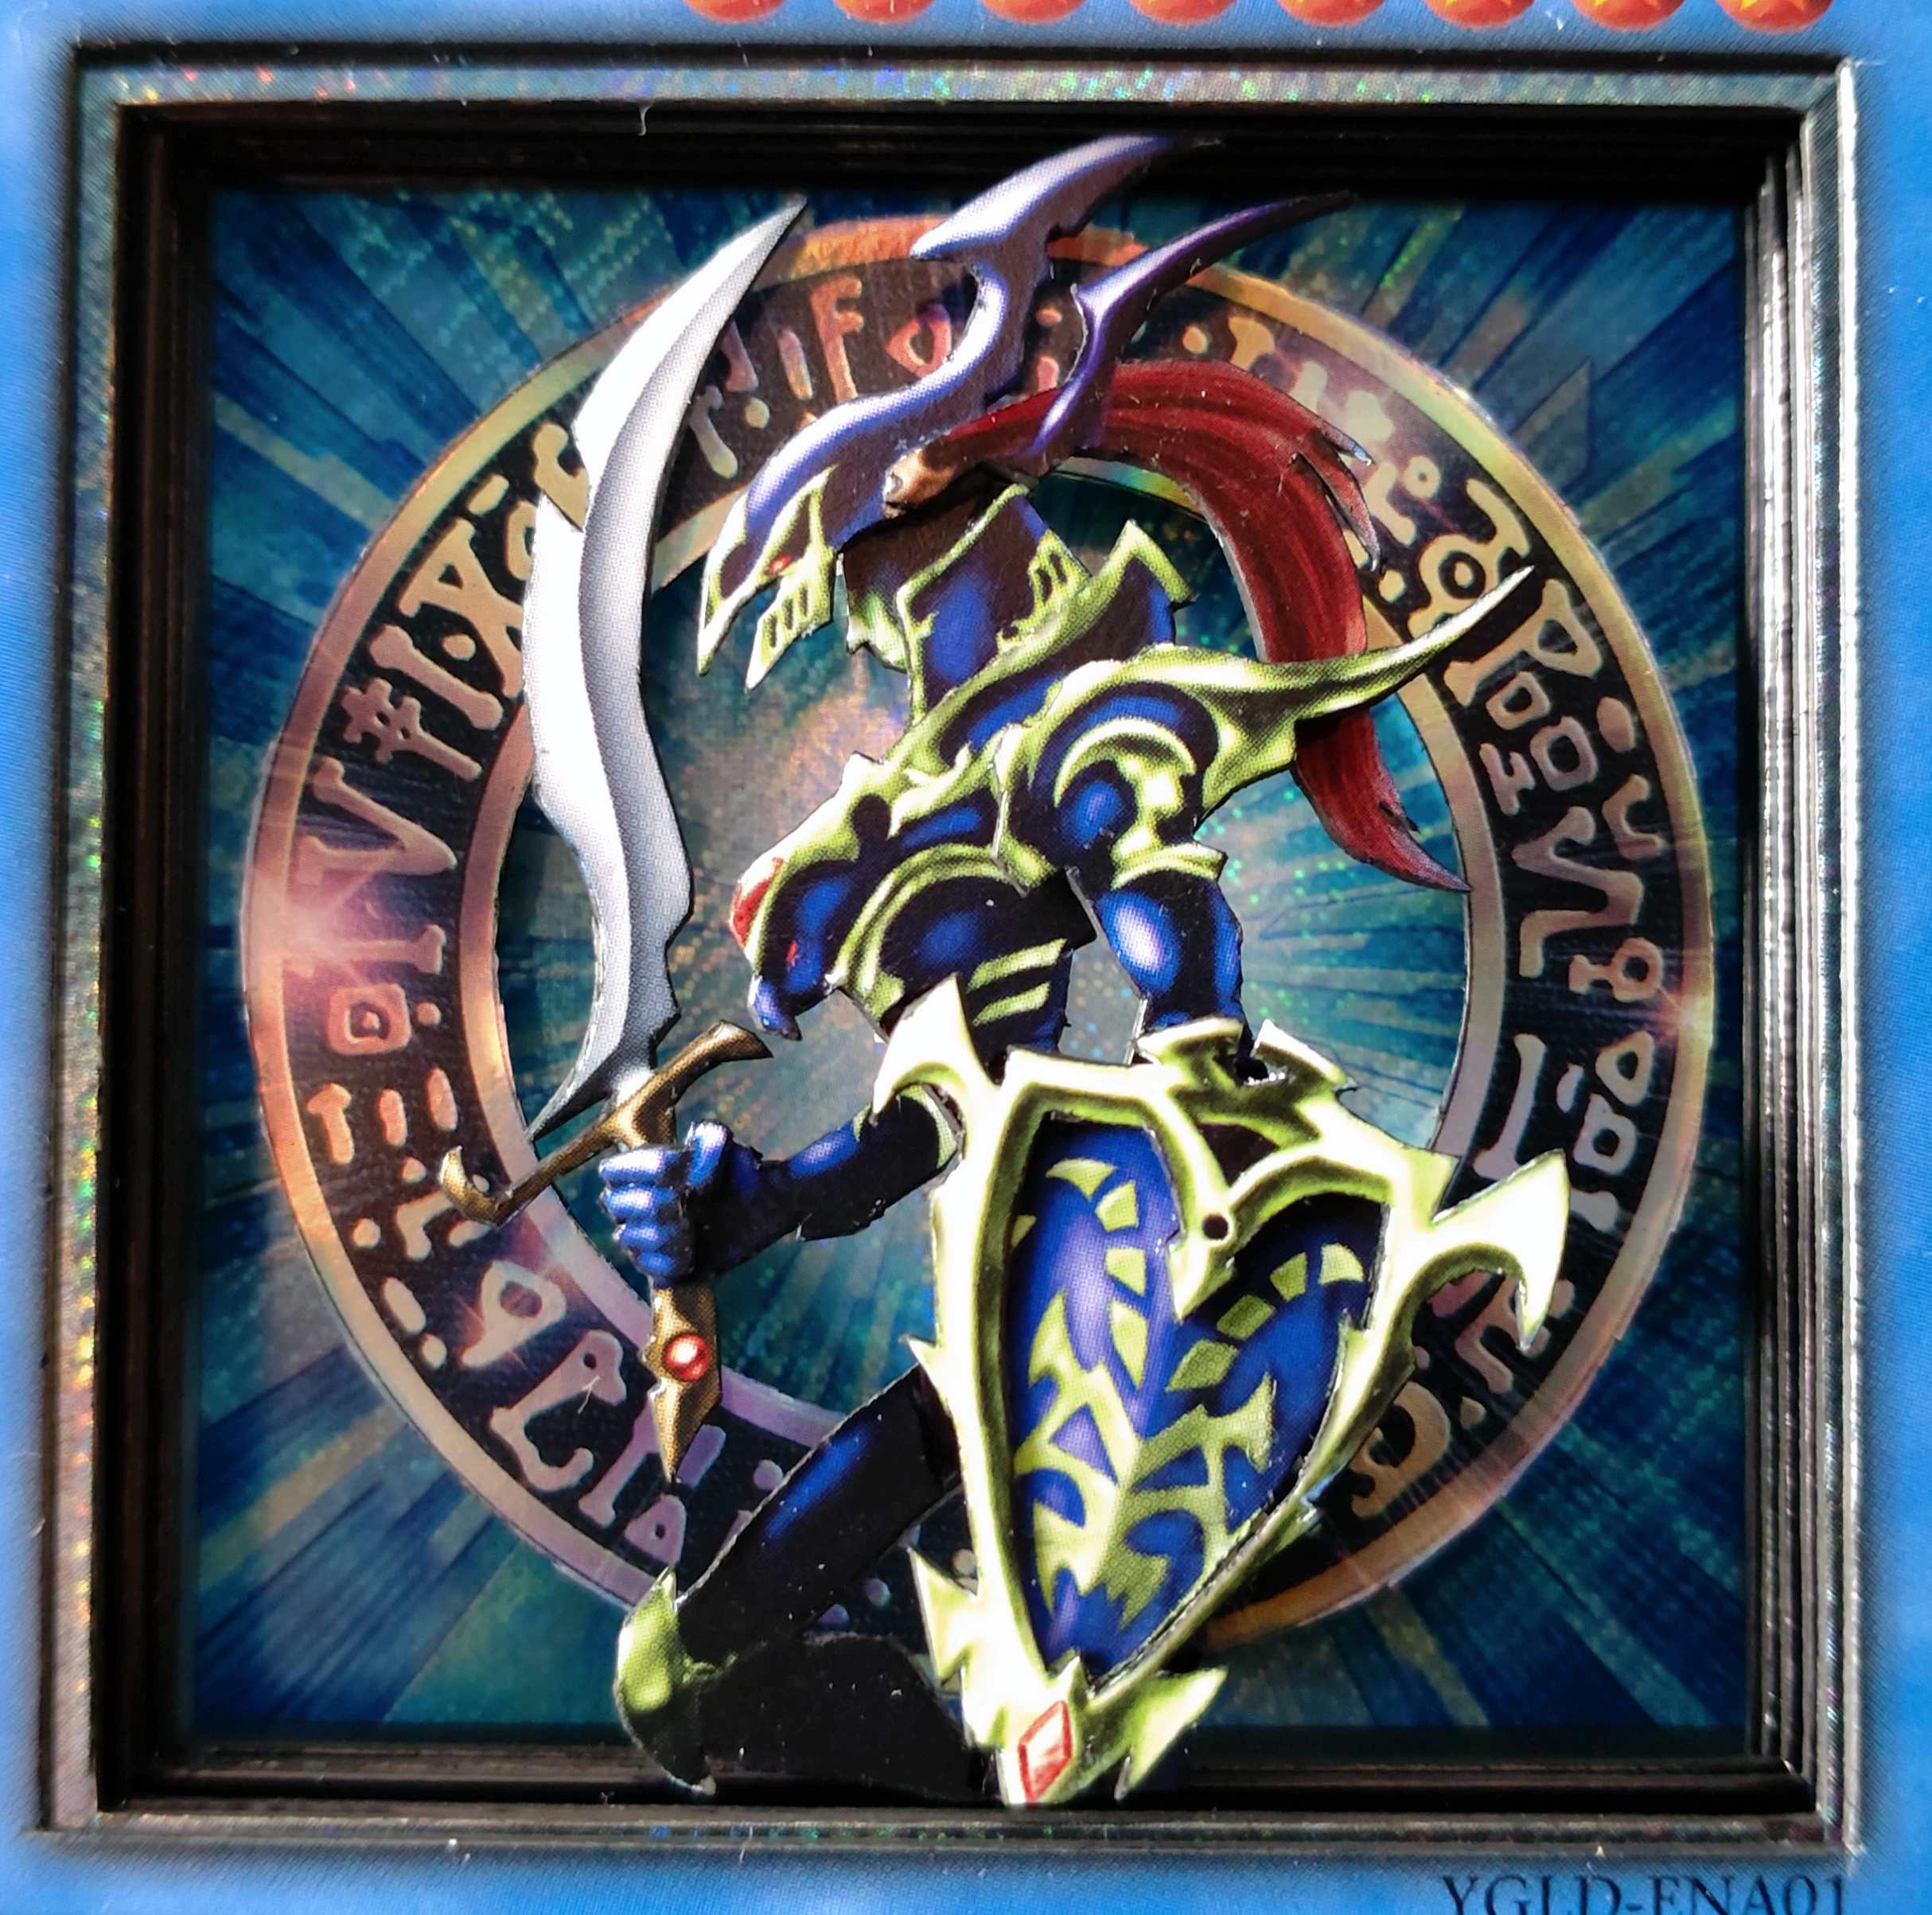 Yu-Gi-Oh Tournament Black Luster Soldier